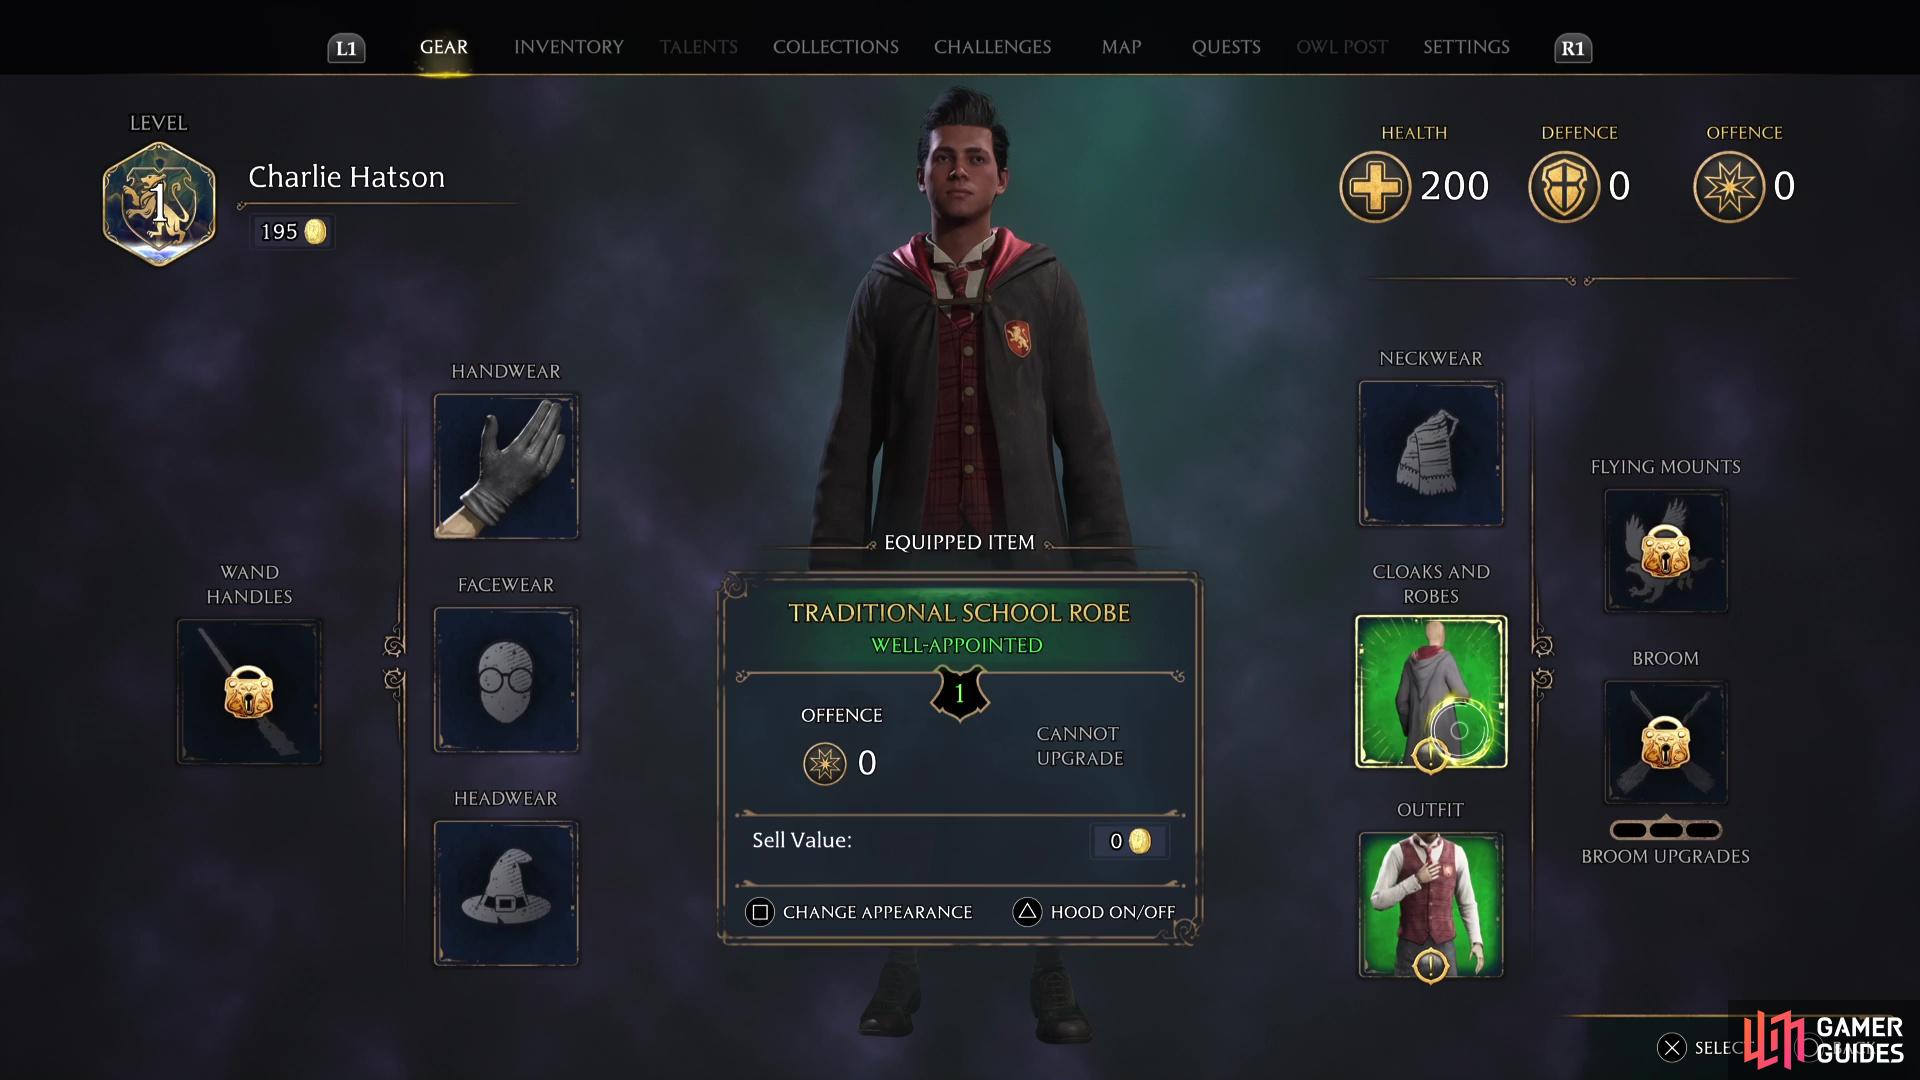 The Gear screen in Hogwarts Legacy showing your current level